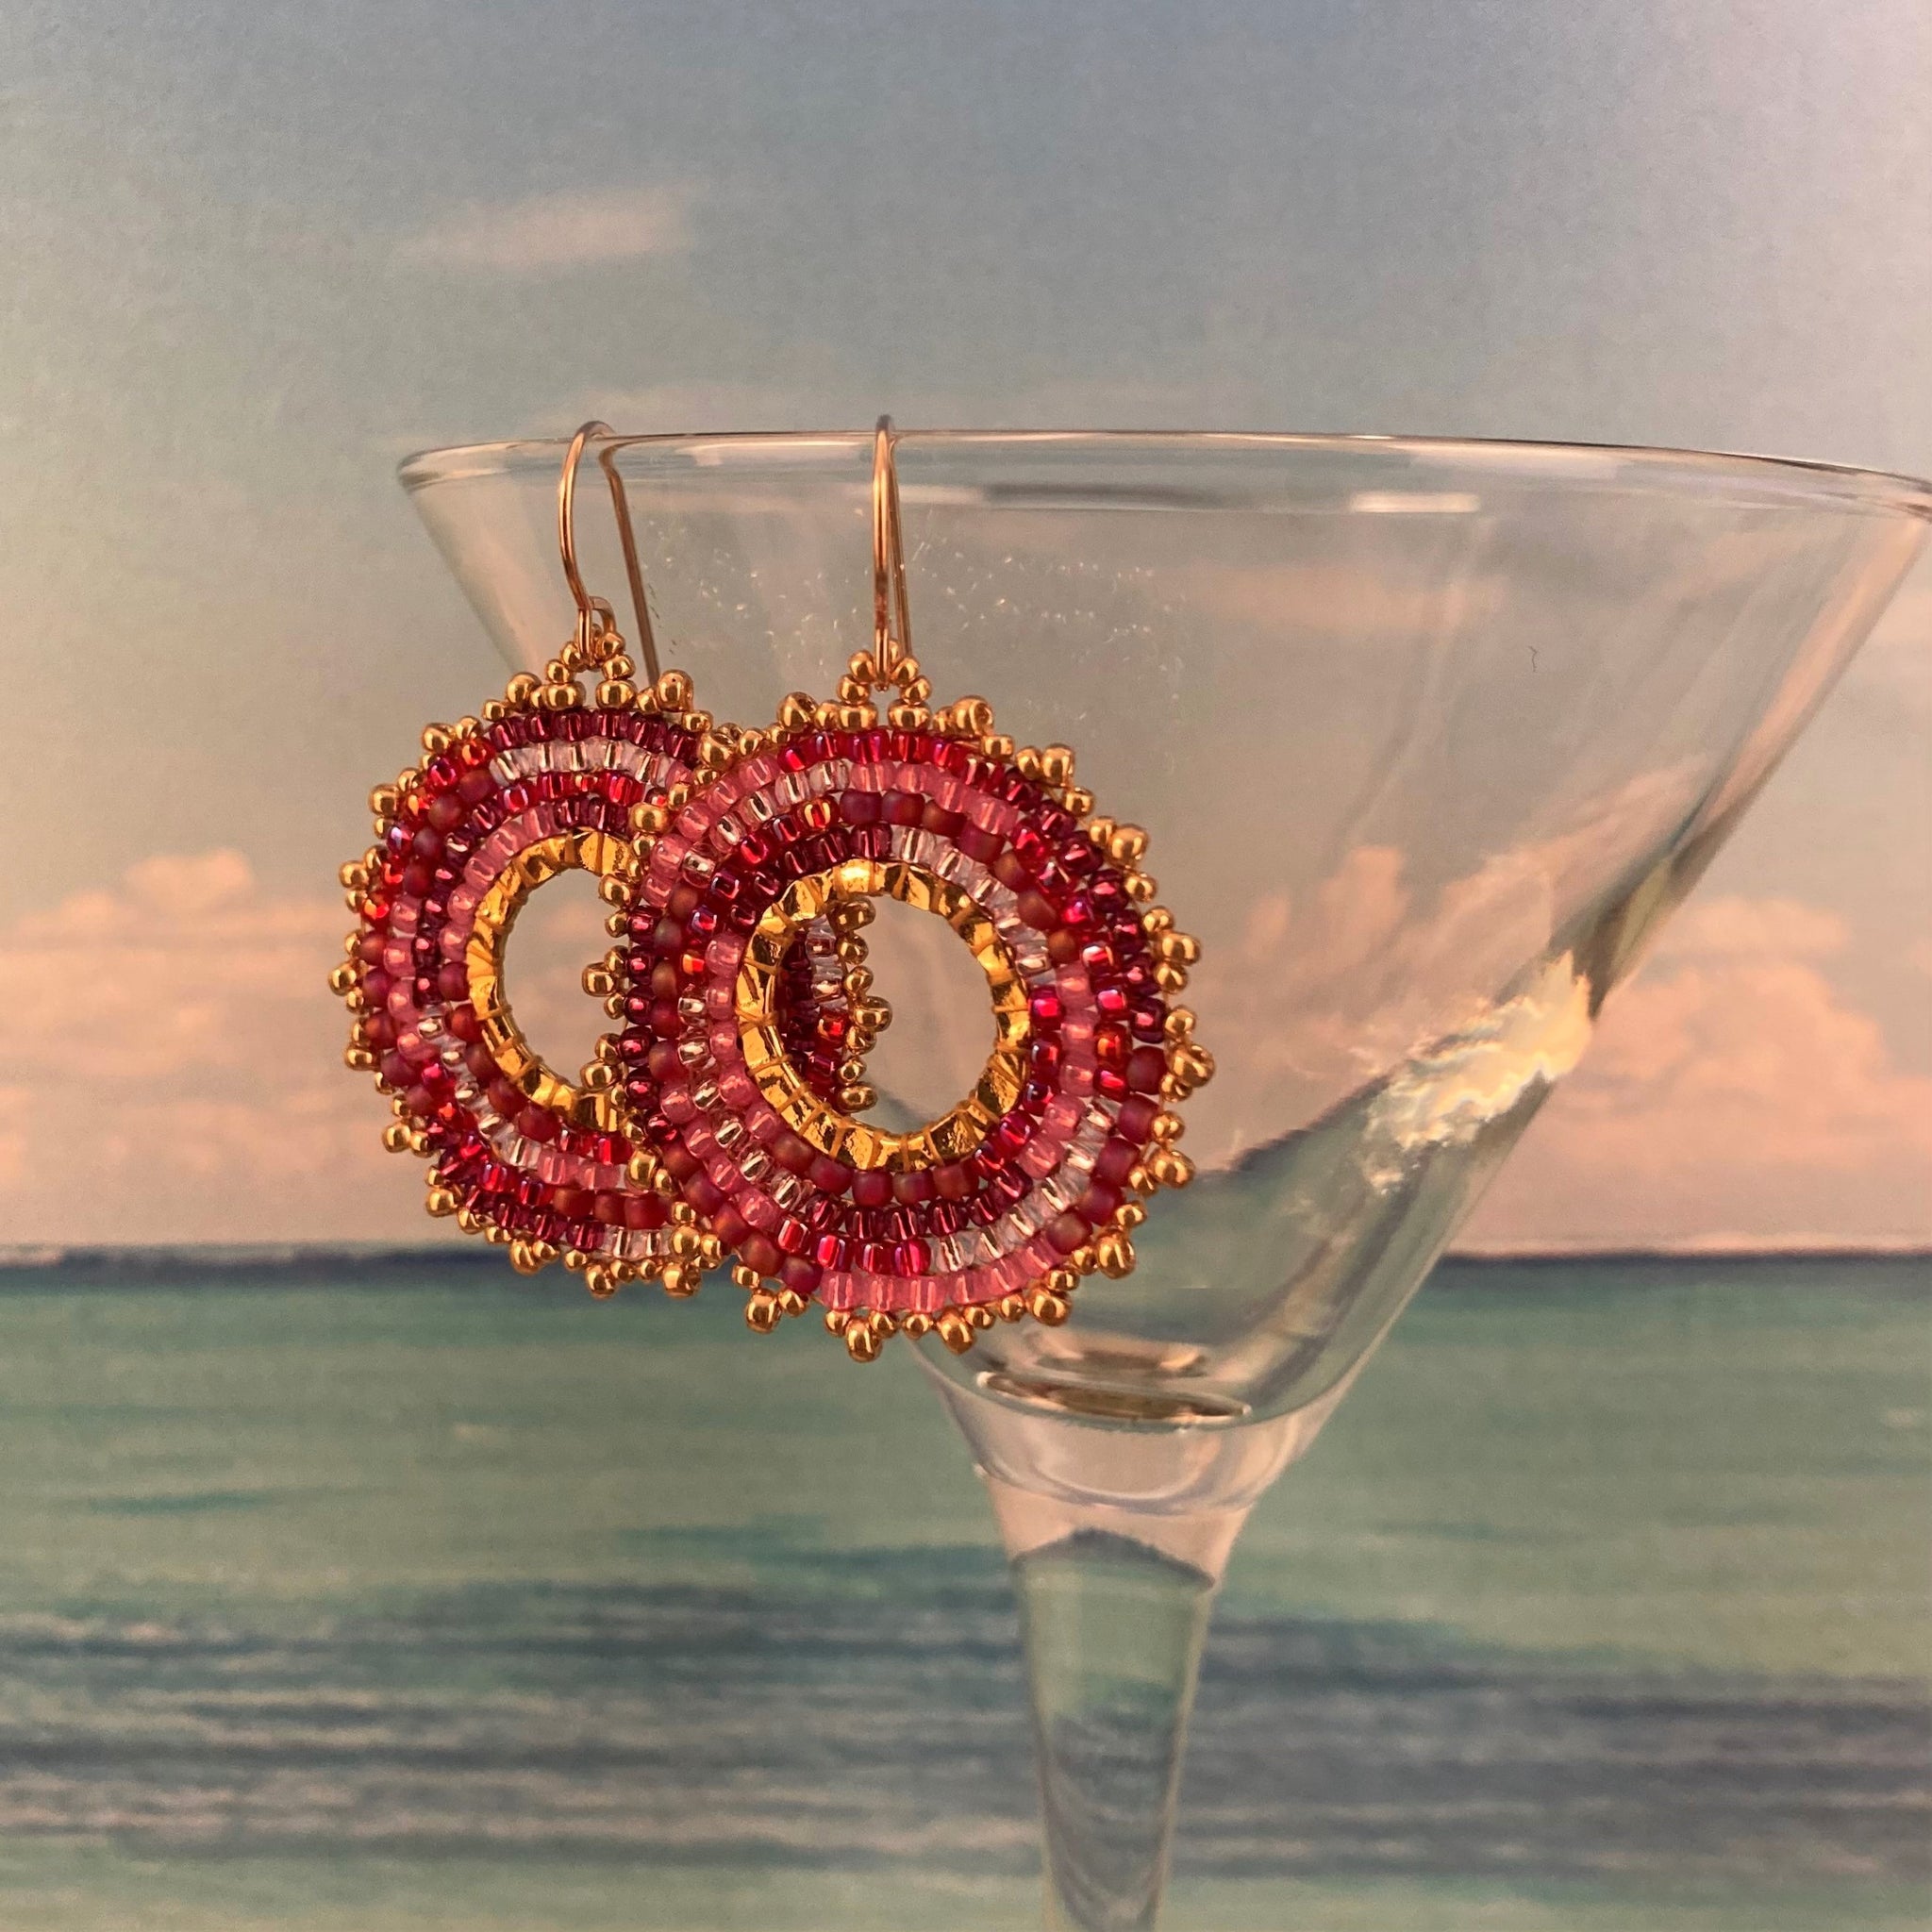 Petite beaded Hot pink raspberry wine light pink beads hammered hoops 14K gold filled lightweight sparkling statement Beaded By The Beach resort lightweight bridal prom party beach fun fashion custom artisan hand made in USA beach surf vacation Boho wedding special event ocean surf casual elegant hoop